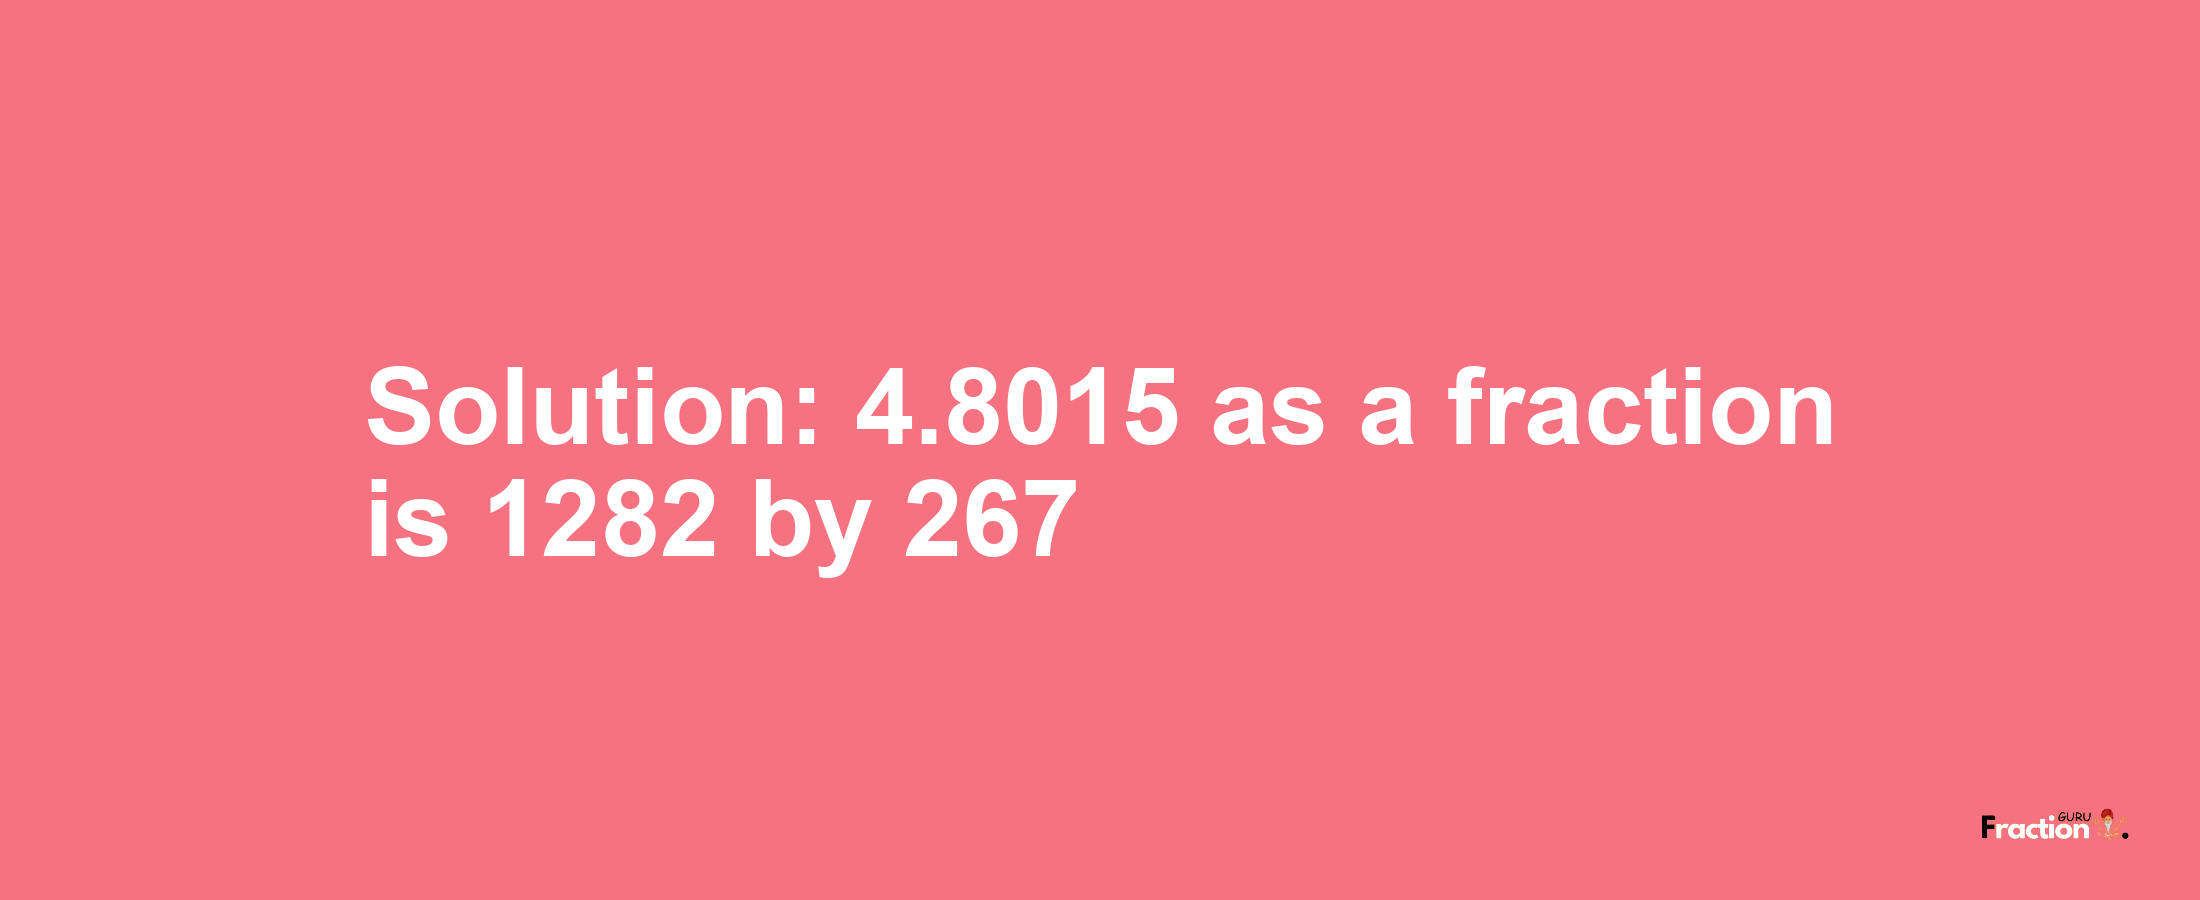 Solution:4.8015 as a fraction is 1282/267